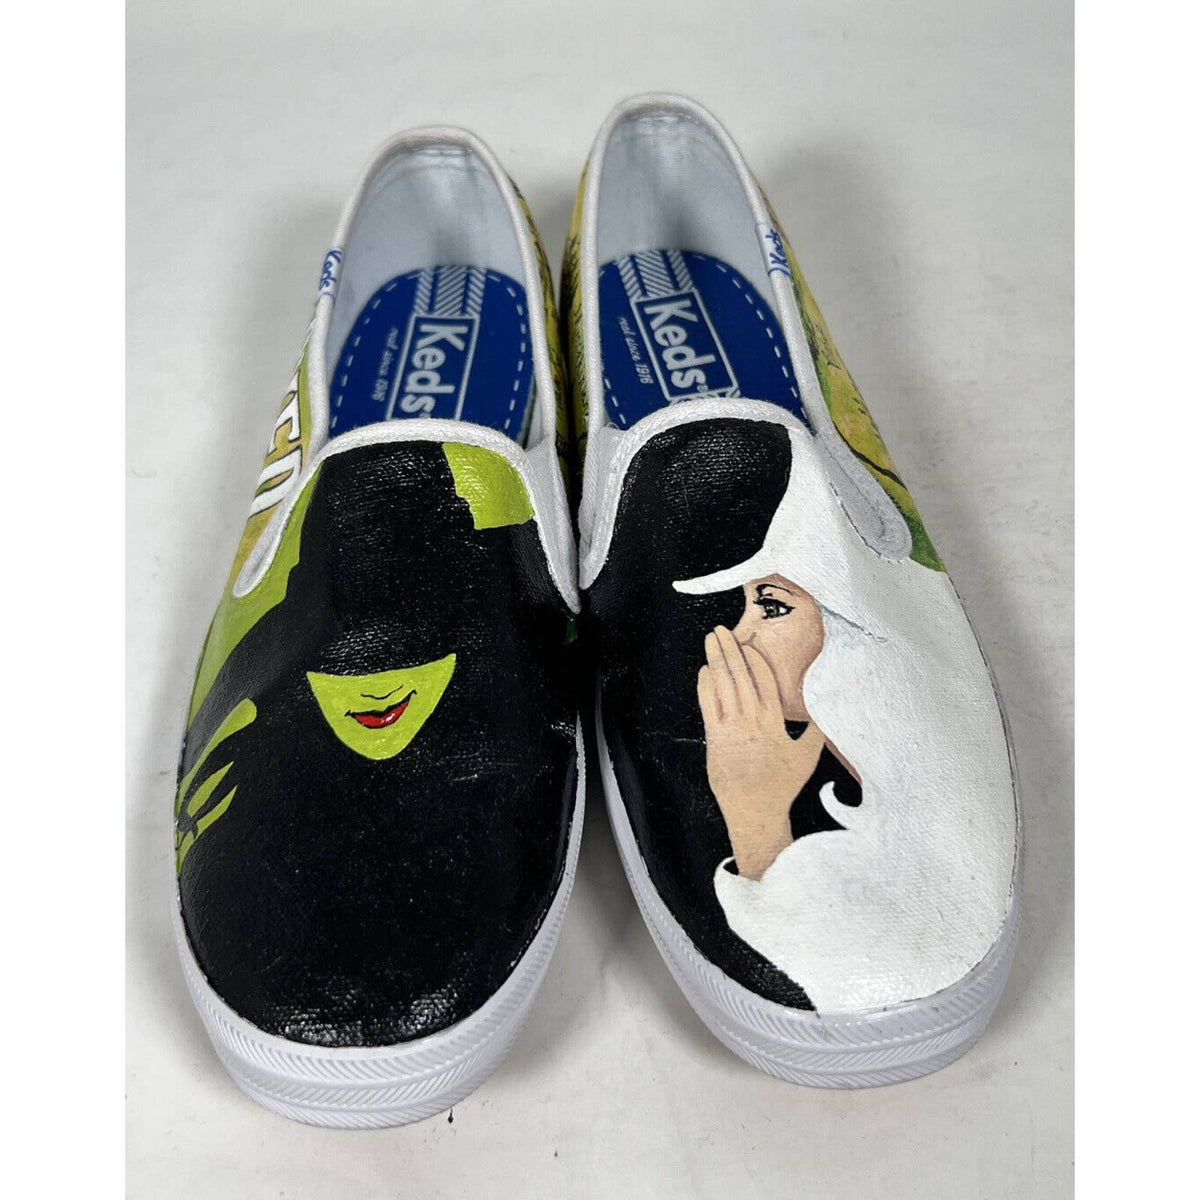 Wicked The Musical Play Hand Painted Keds Sneakers Sz.7